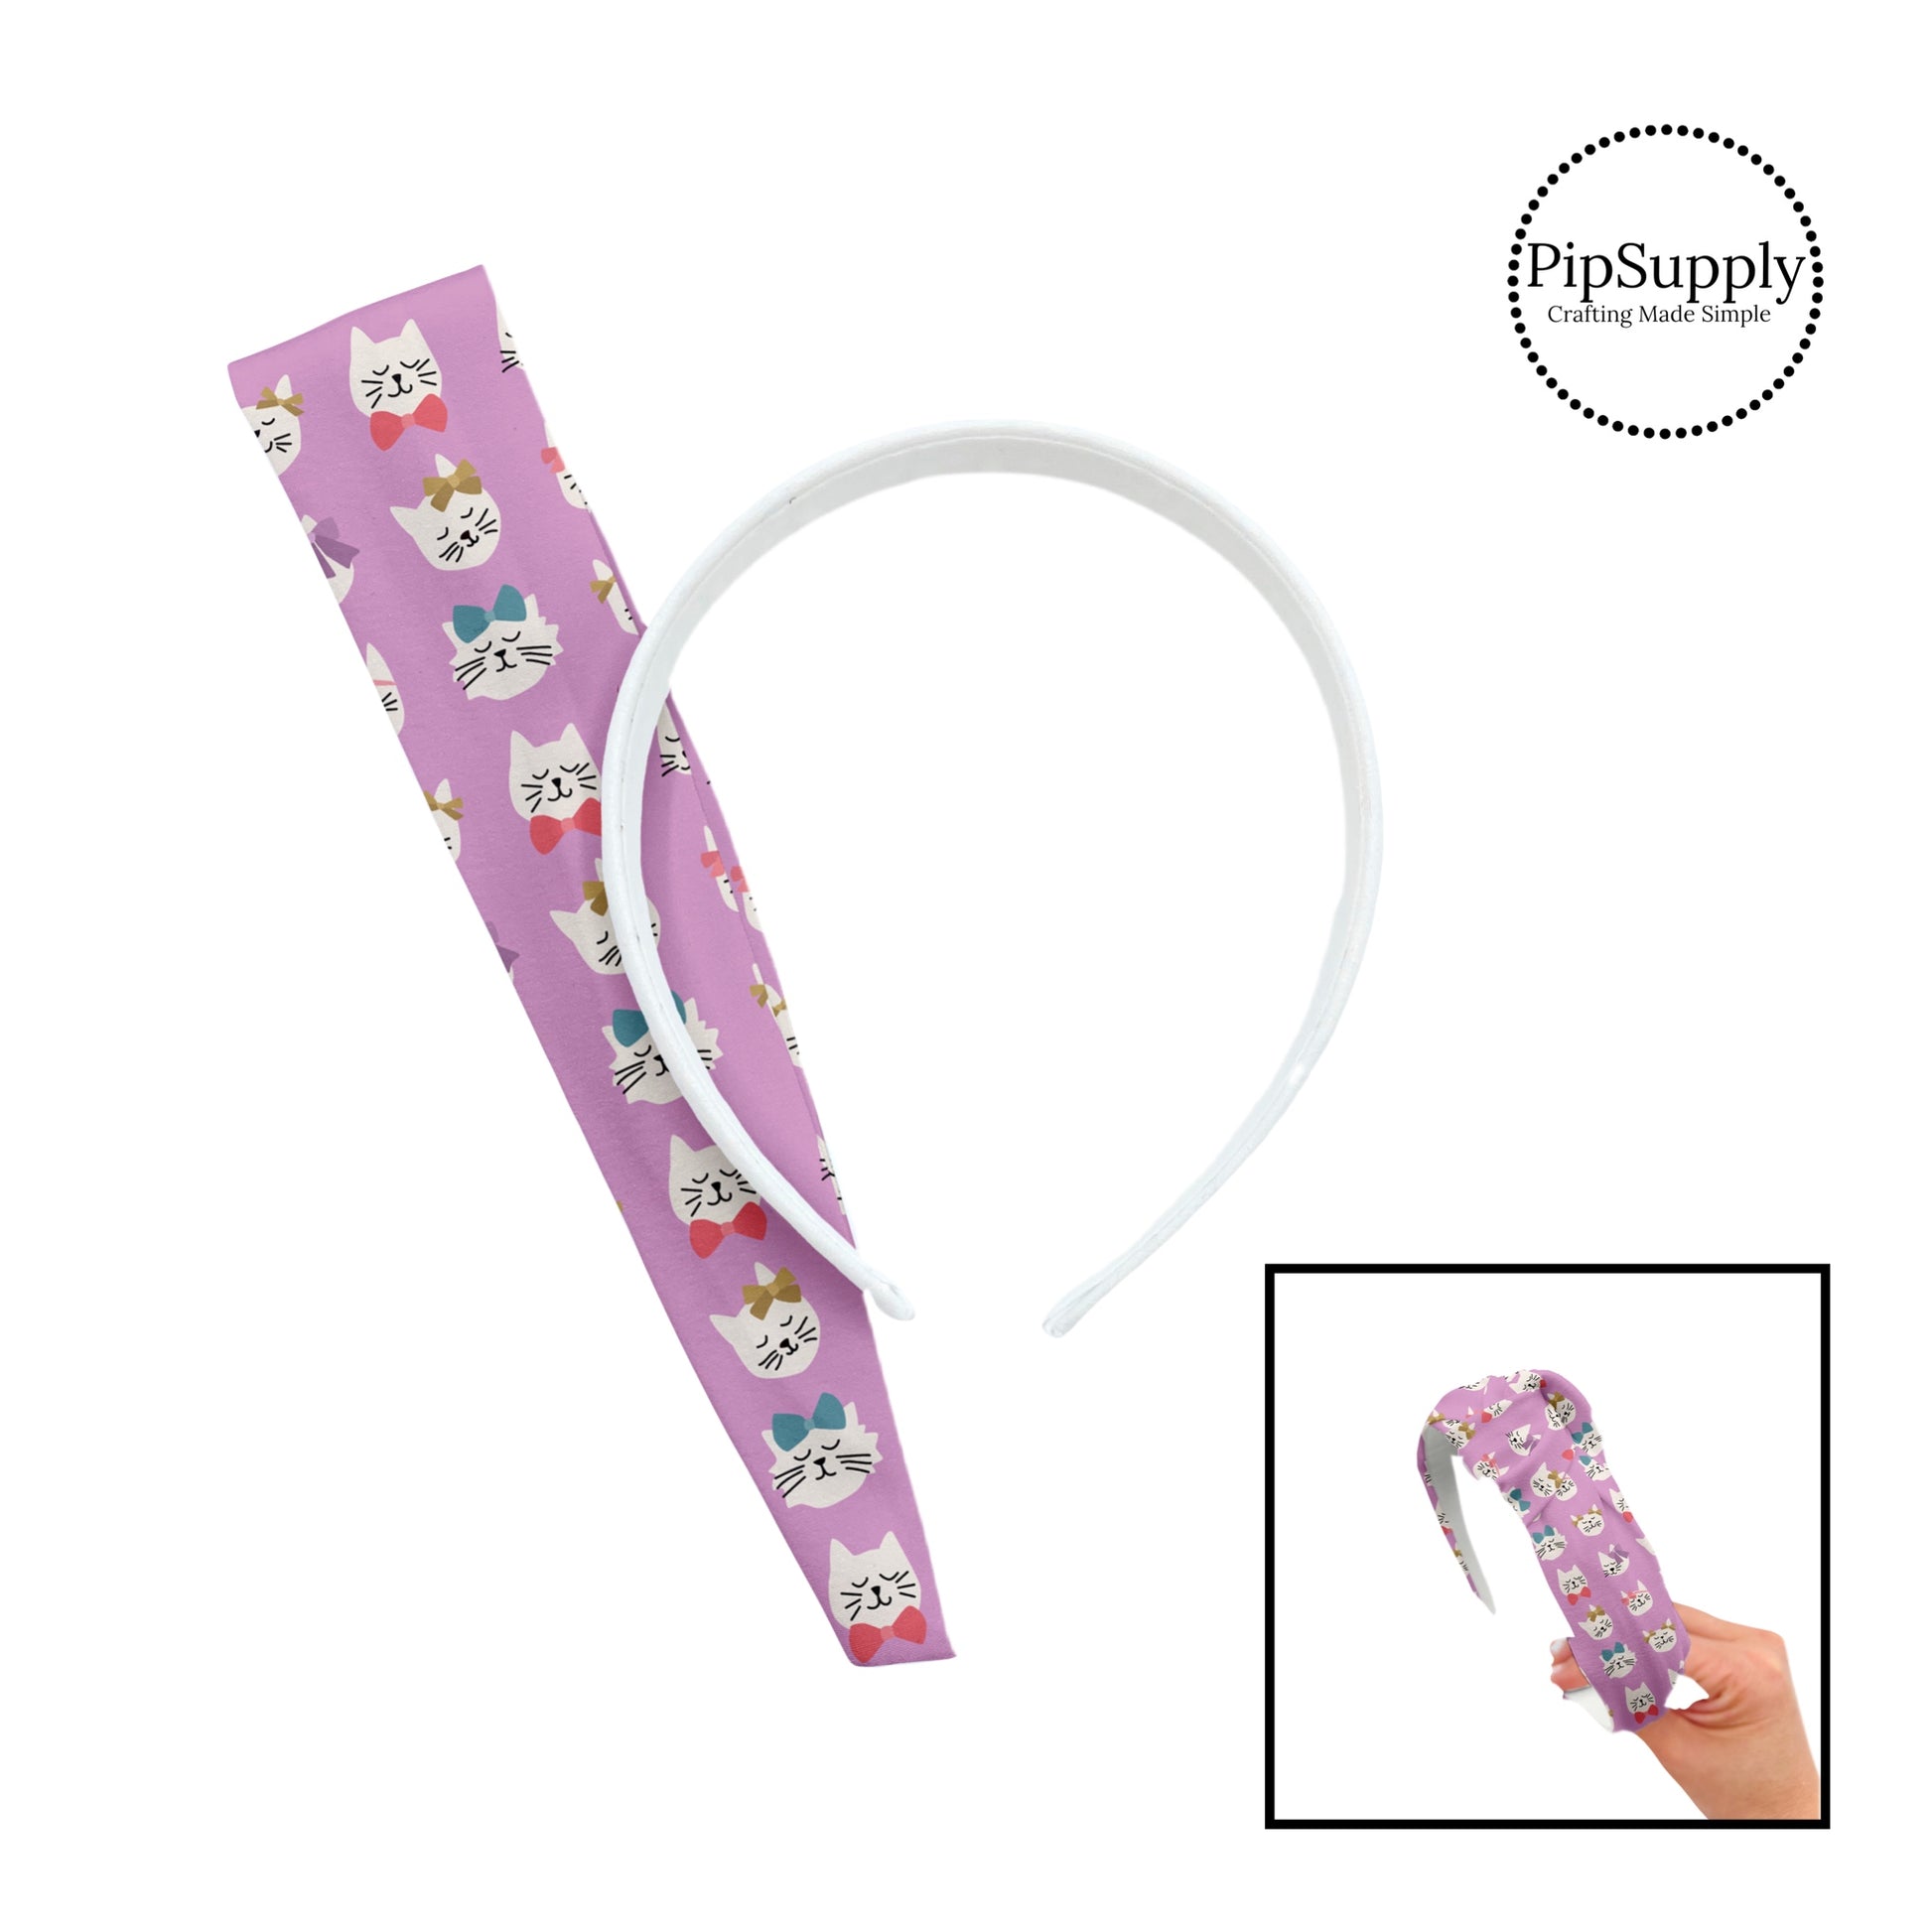 These Valentine's patterned headband kits are easy to assemble and come with everything you need to make your own knotted headband. These Valentine's Day kits include a custom printed and sewn fabric strip and a coordinating velvet headband. This cute pattern features kitties with colorful bows on light purple. 